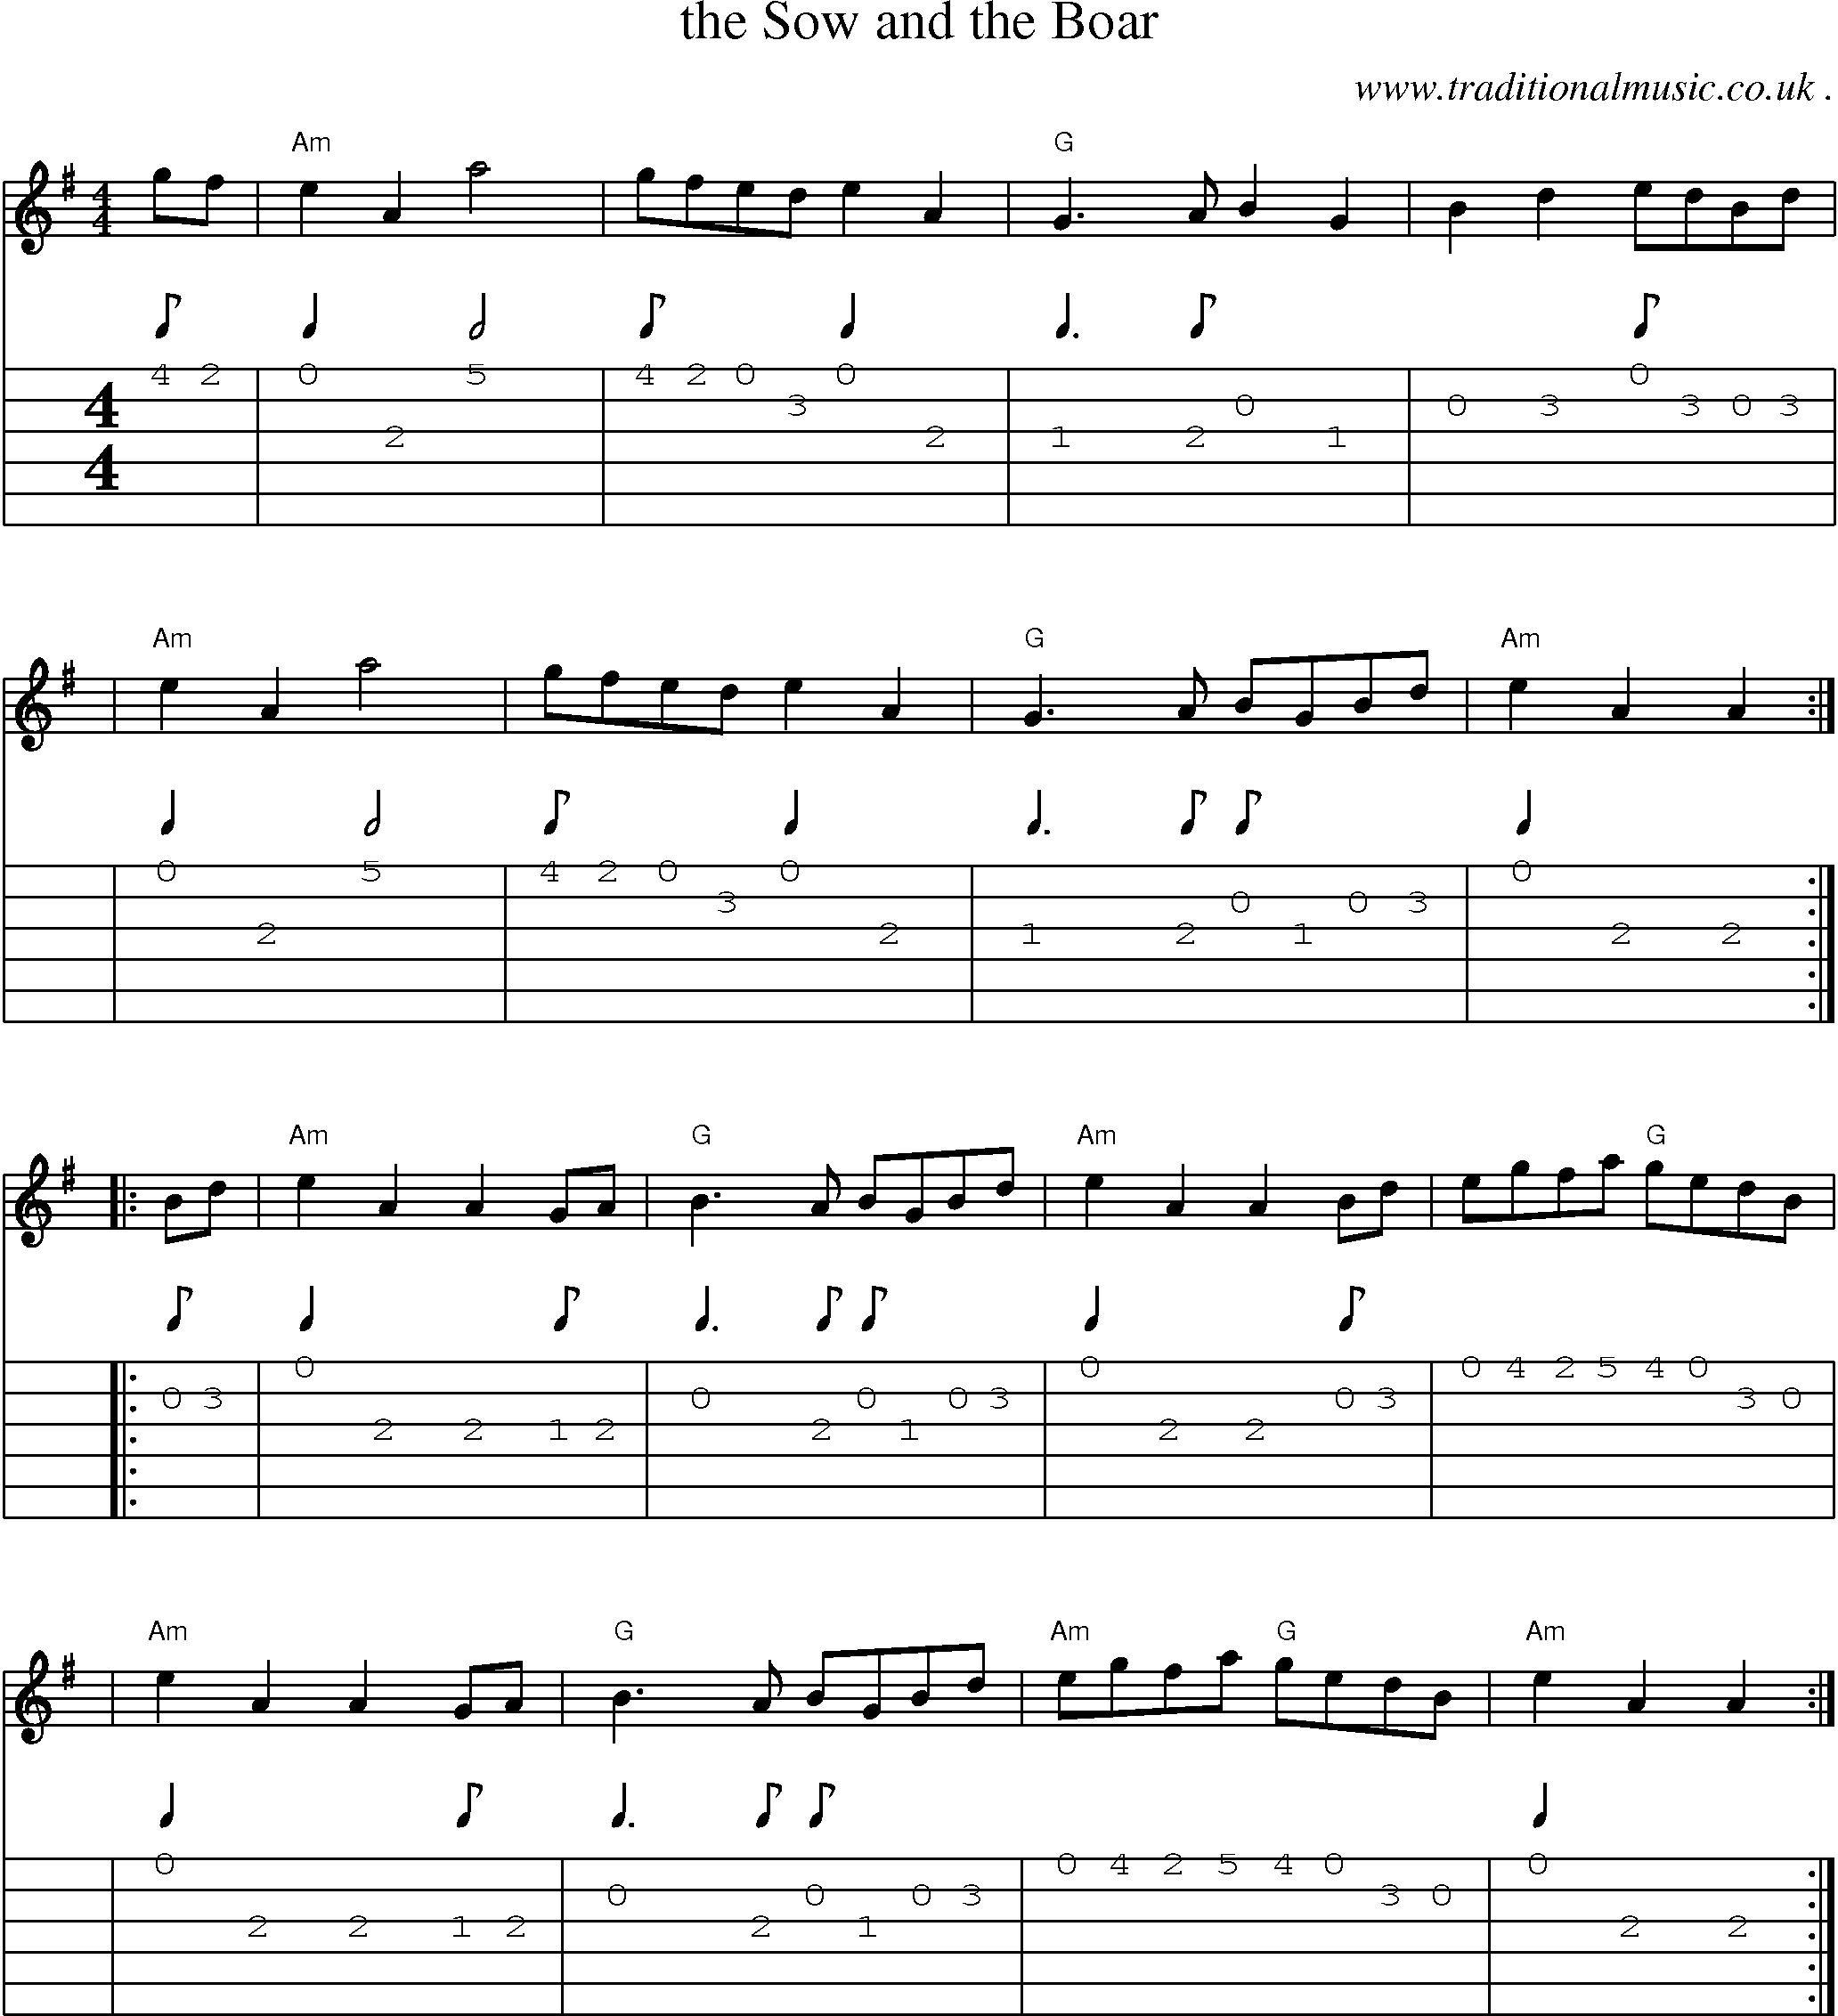 Sheet-music  score, Chords and Guitar Tabs for The Sow And The Boar